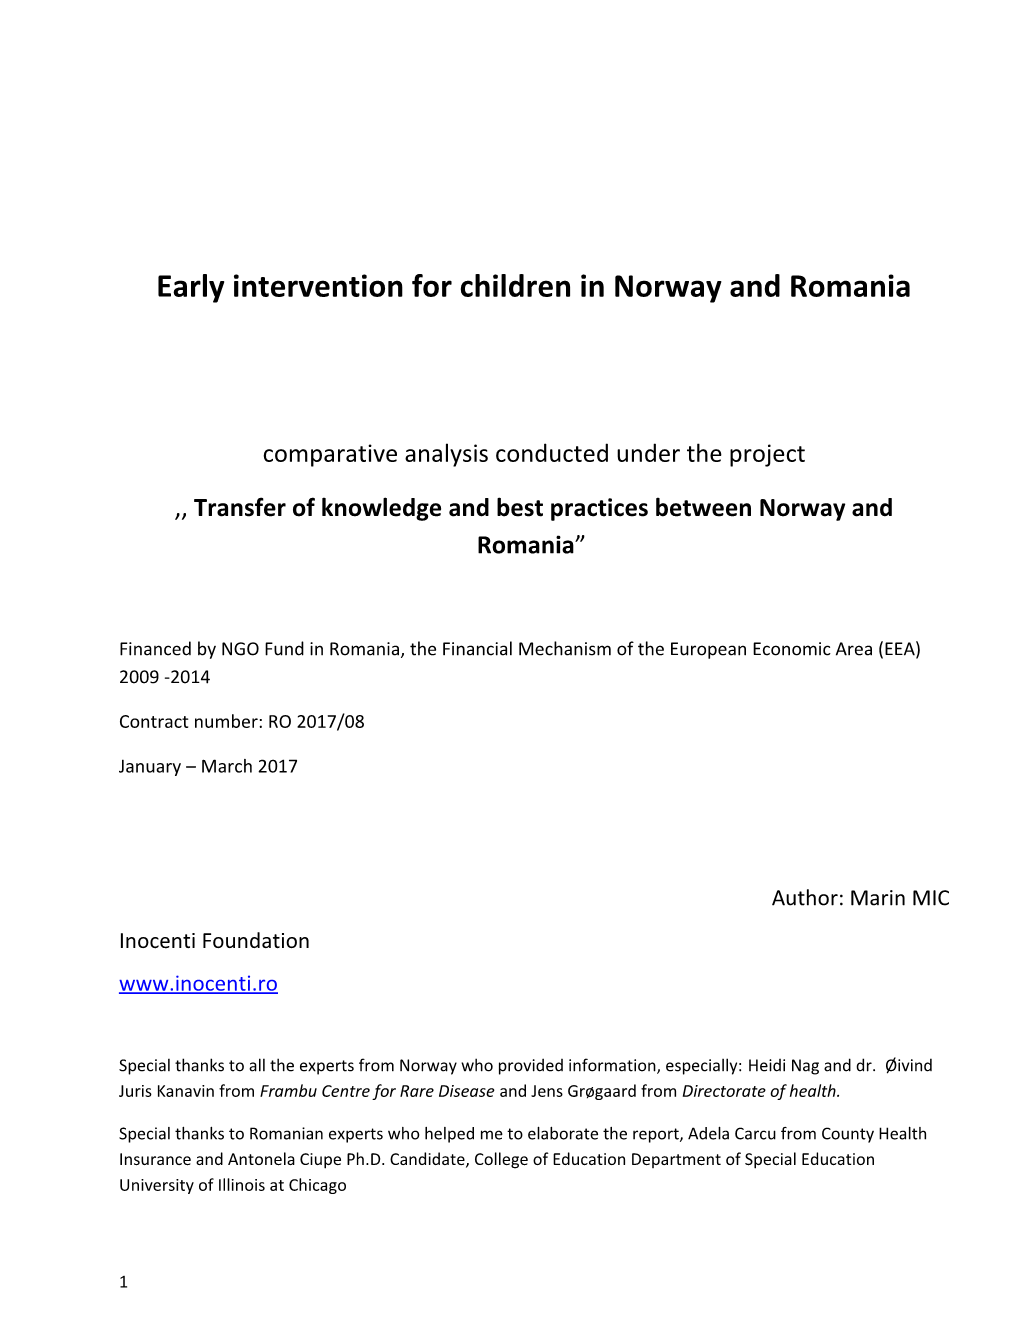 Early Intervention for Children in Norway and Romania